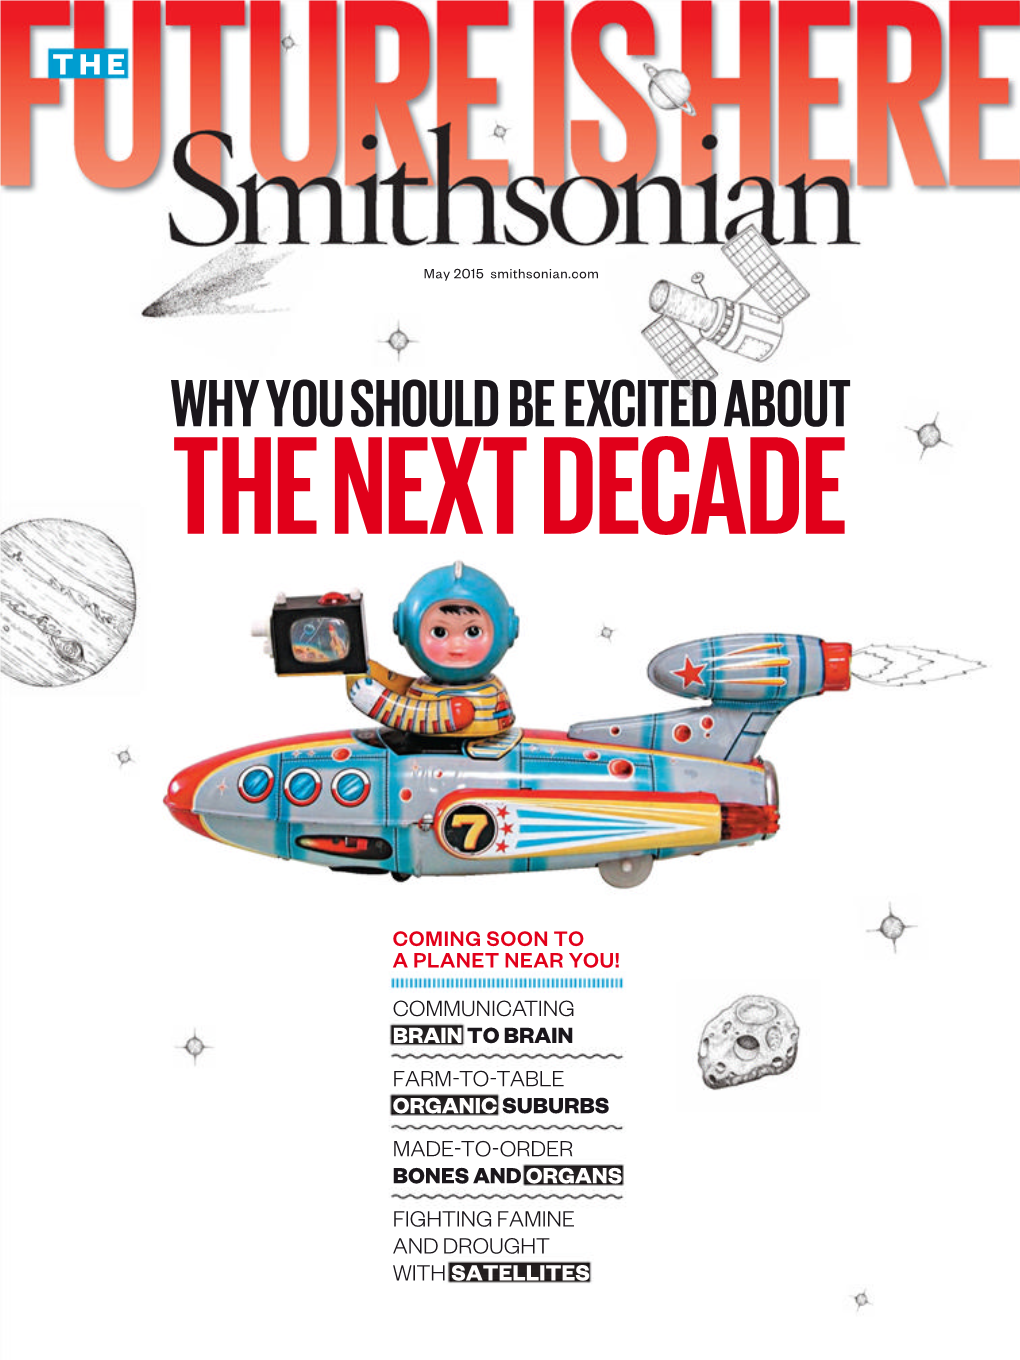 Smithsonian.Com WHYTHE YOU NEXT SHOULD BE DECADE EXCITED ABOUT